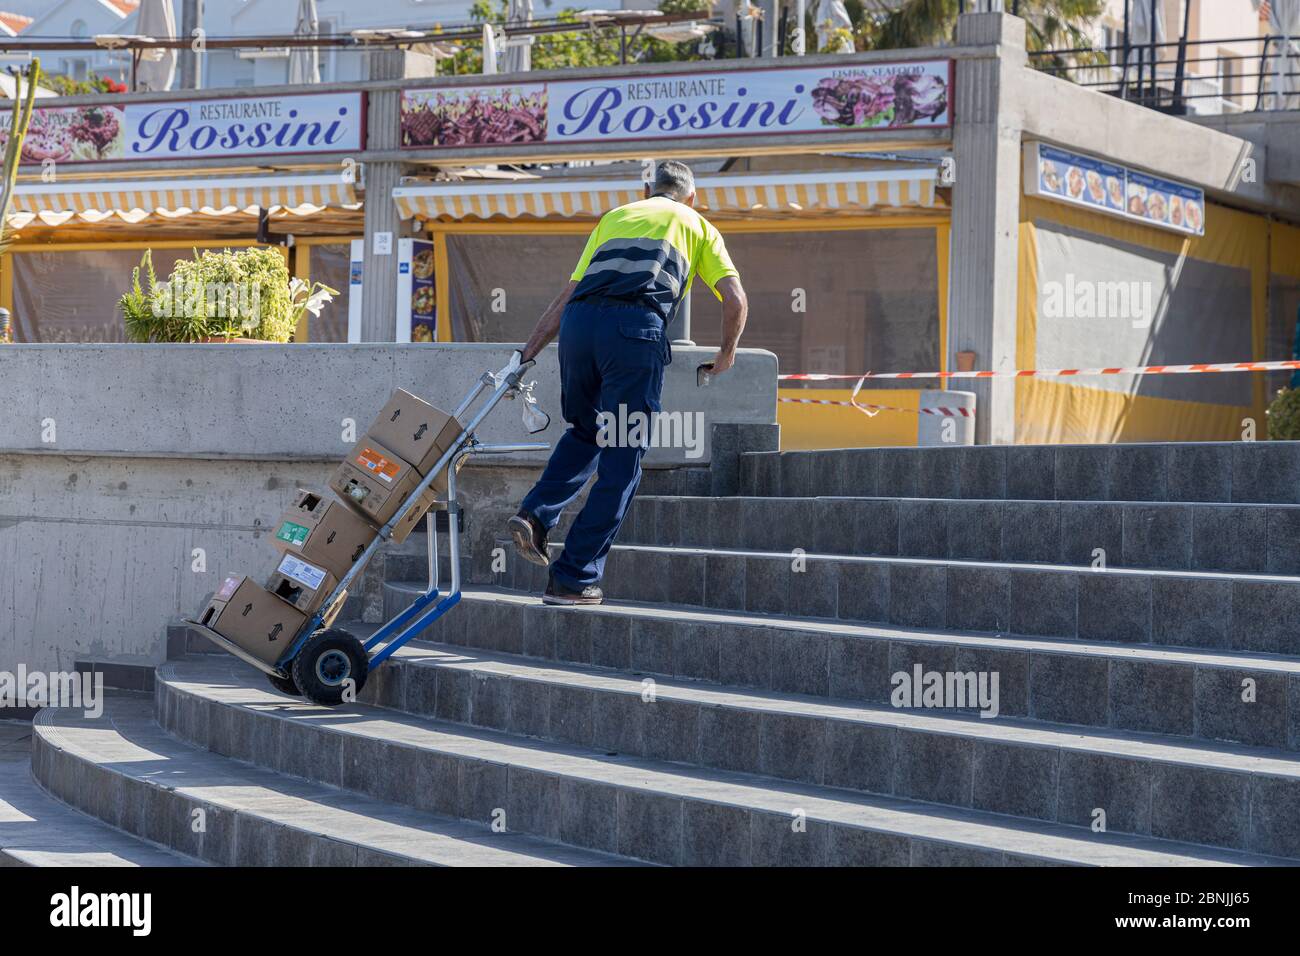 Costa Adeje, Tenerife, Canary Islands, Spain. 15 May 2020. Playa Fañabe beach opens for limited exercise and sports activities. Walking, running are allowed but no sunbathing, water sports or swimming under the de-escalation of the Covid 19, Coronavirus lockdown. Delivery man bringing merchandise to a beach bar which is open. Stock Photo